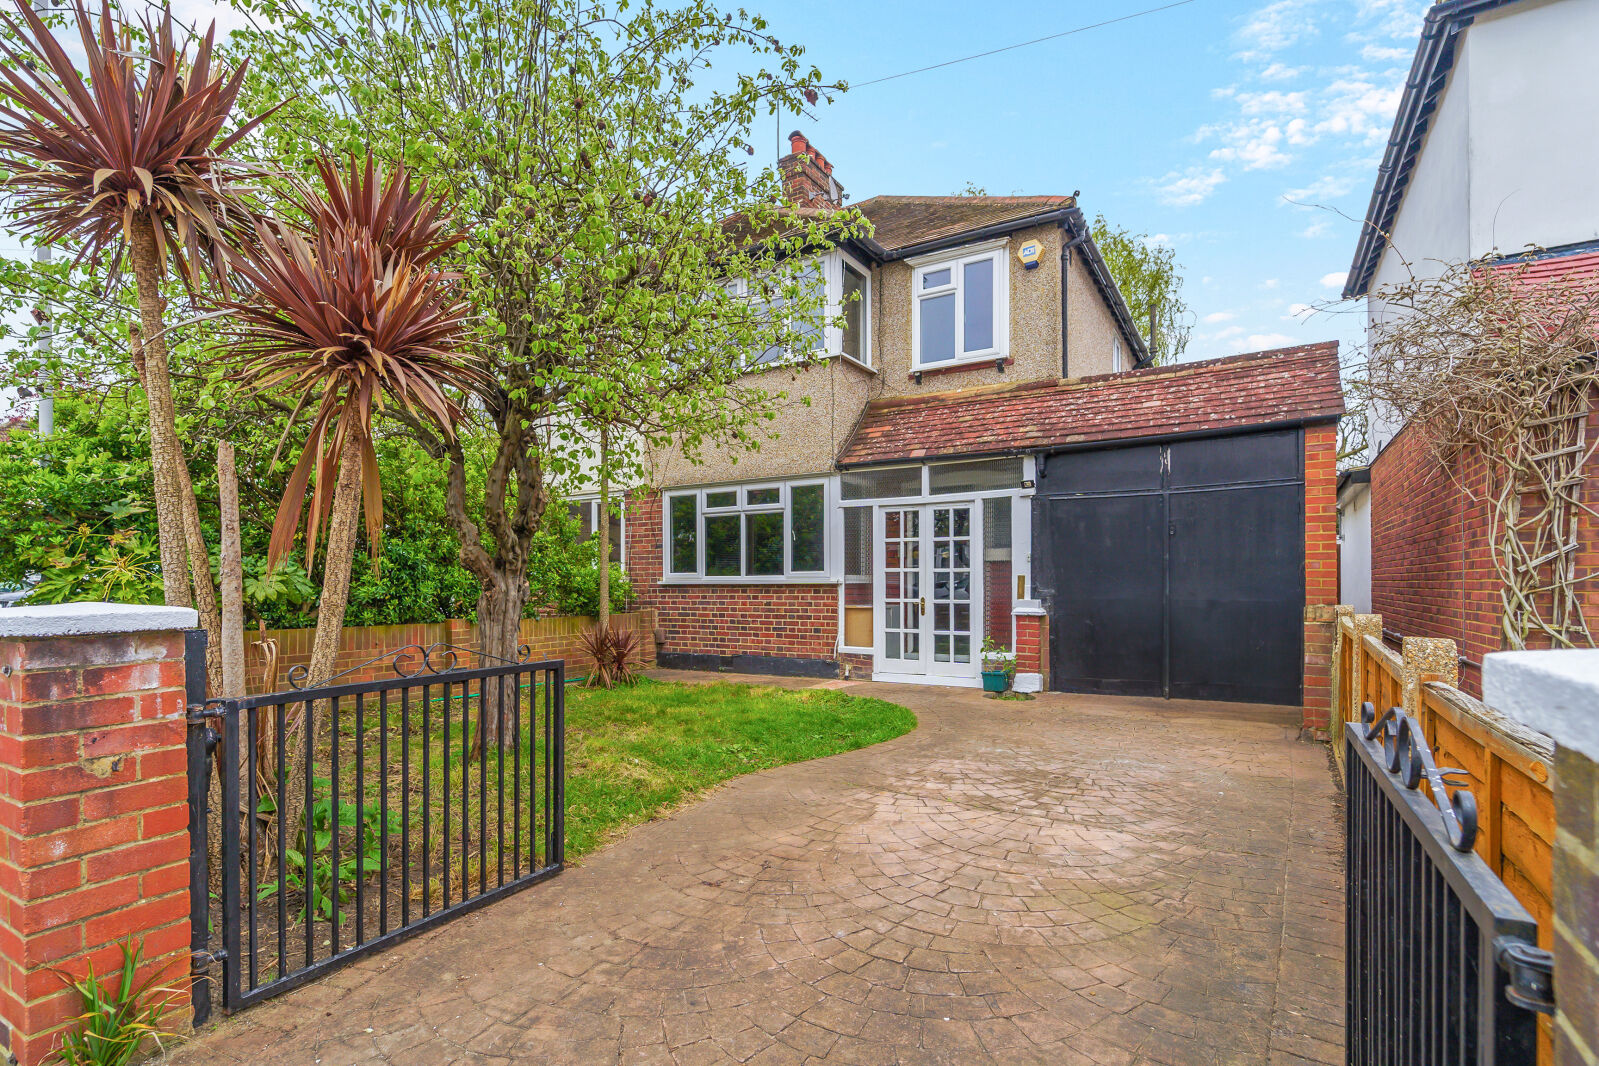 3 bedroom  house to rent, Available now Barnsbury Close, New Malden, KT3, main image